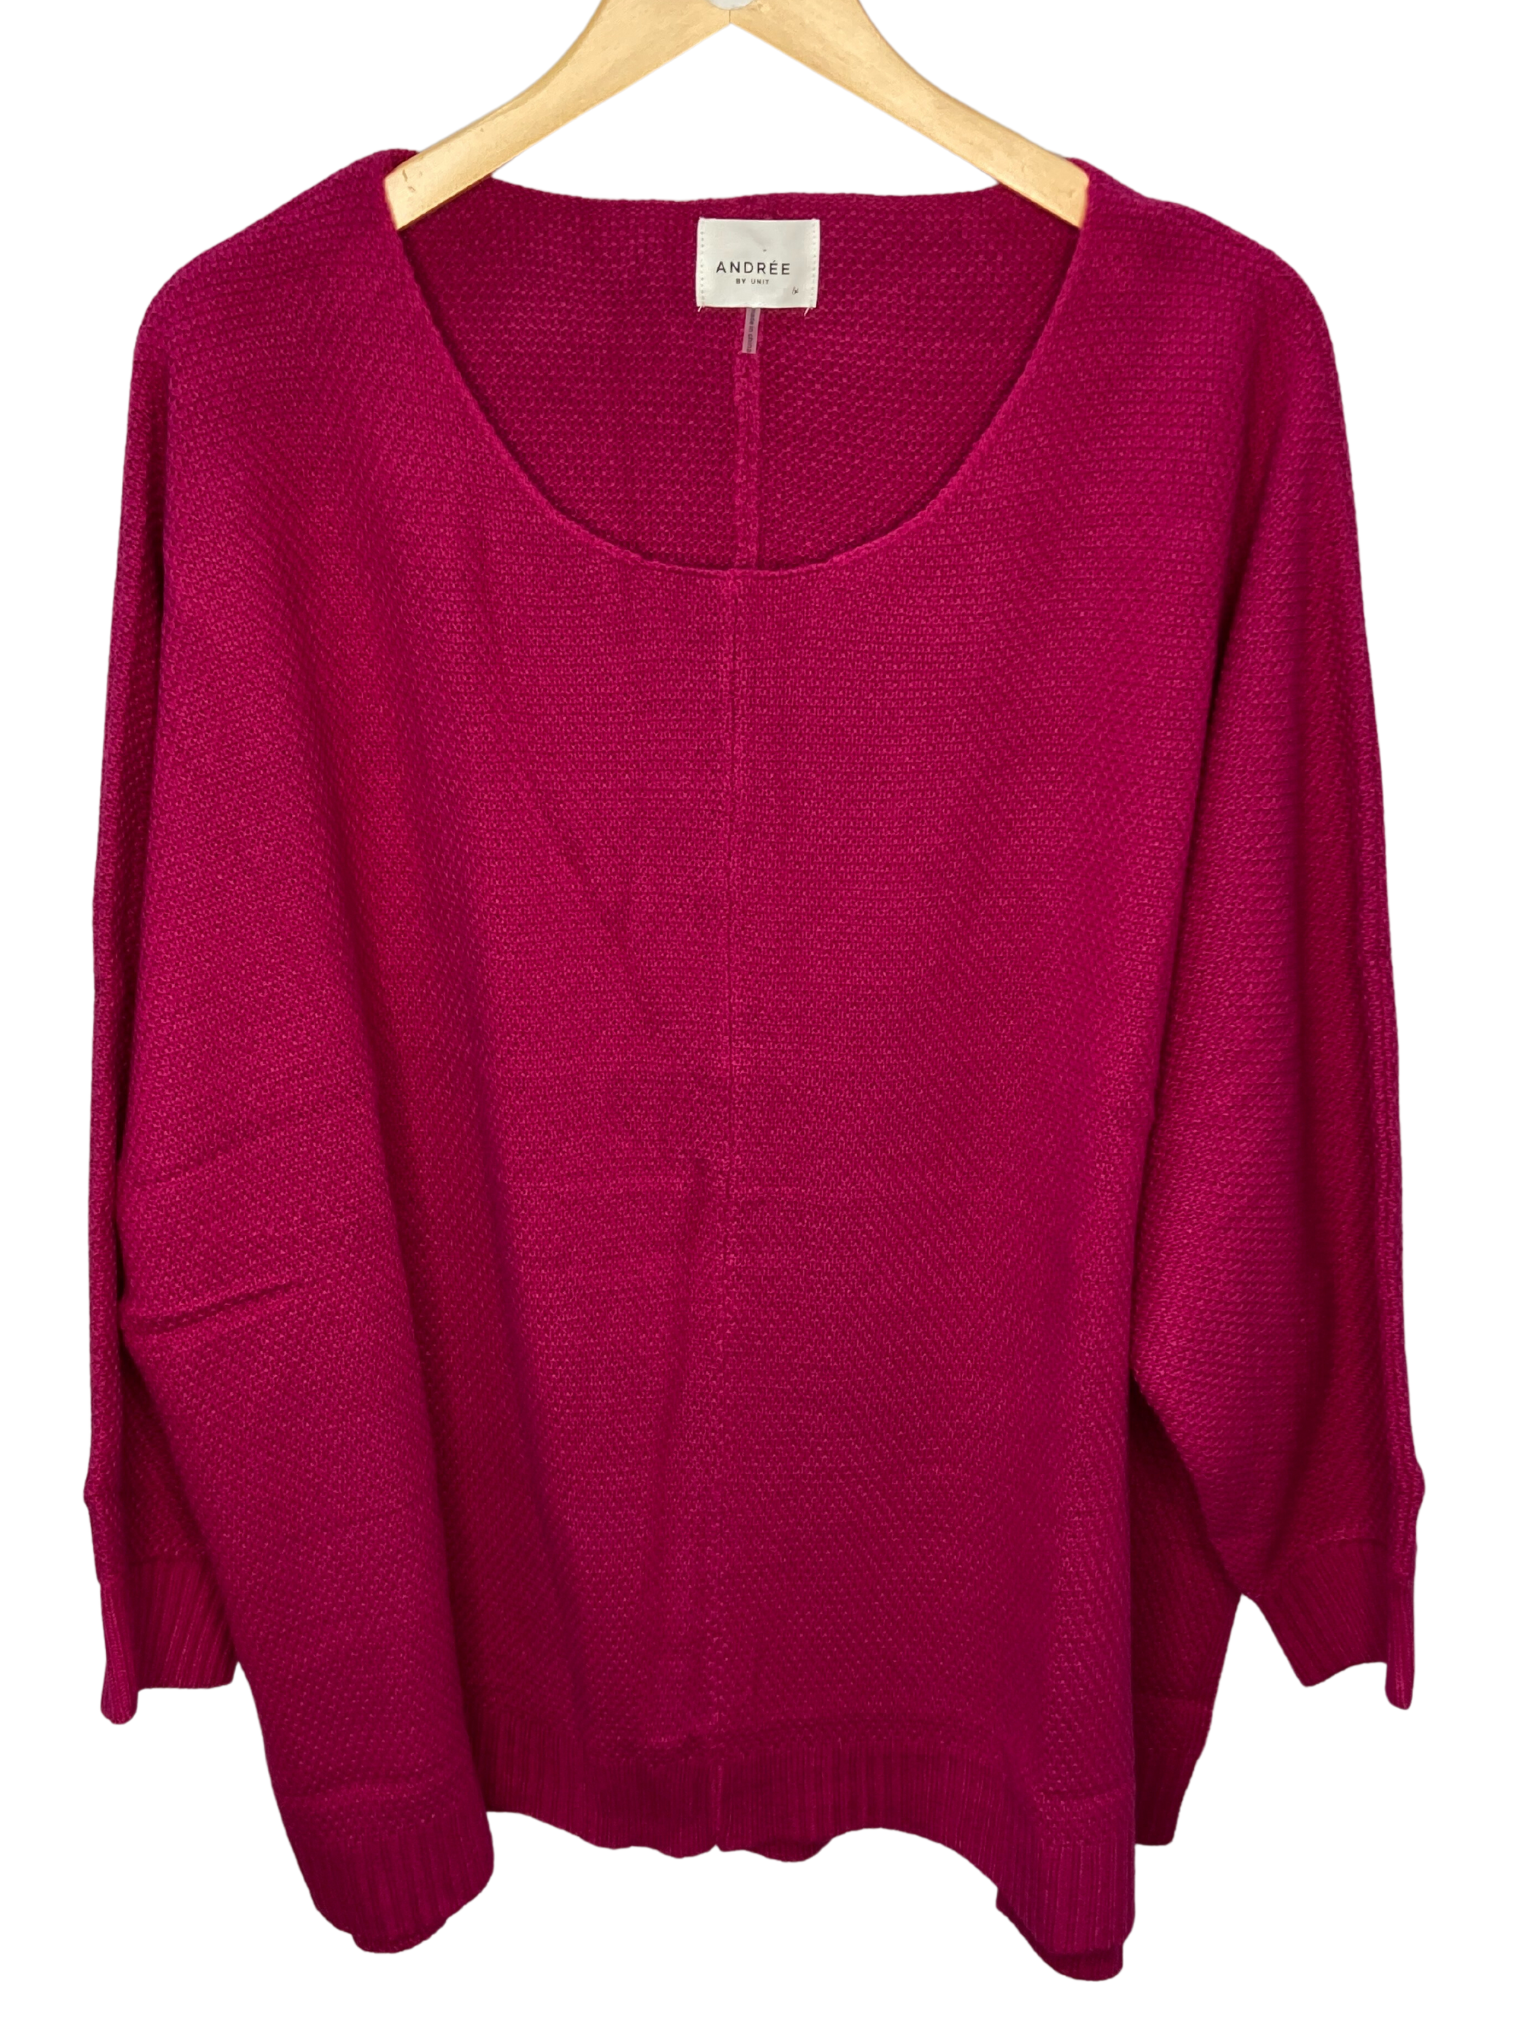 Boat Neckline Sweater with Dolman Sleeves In Magenta